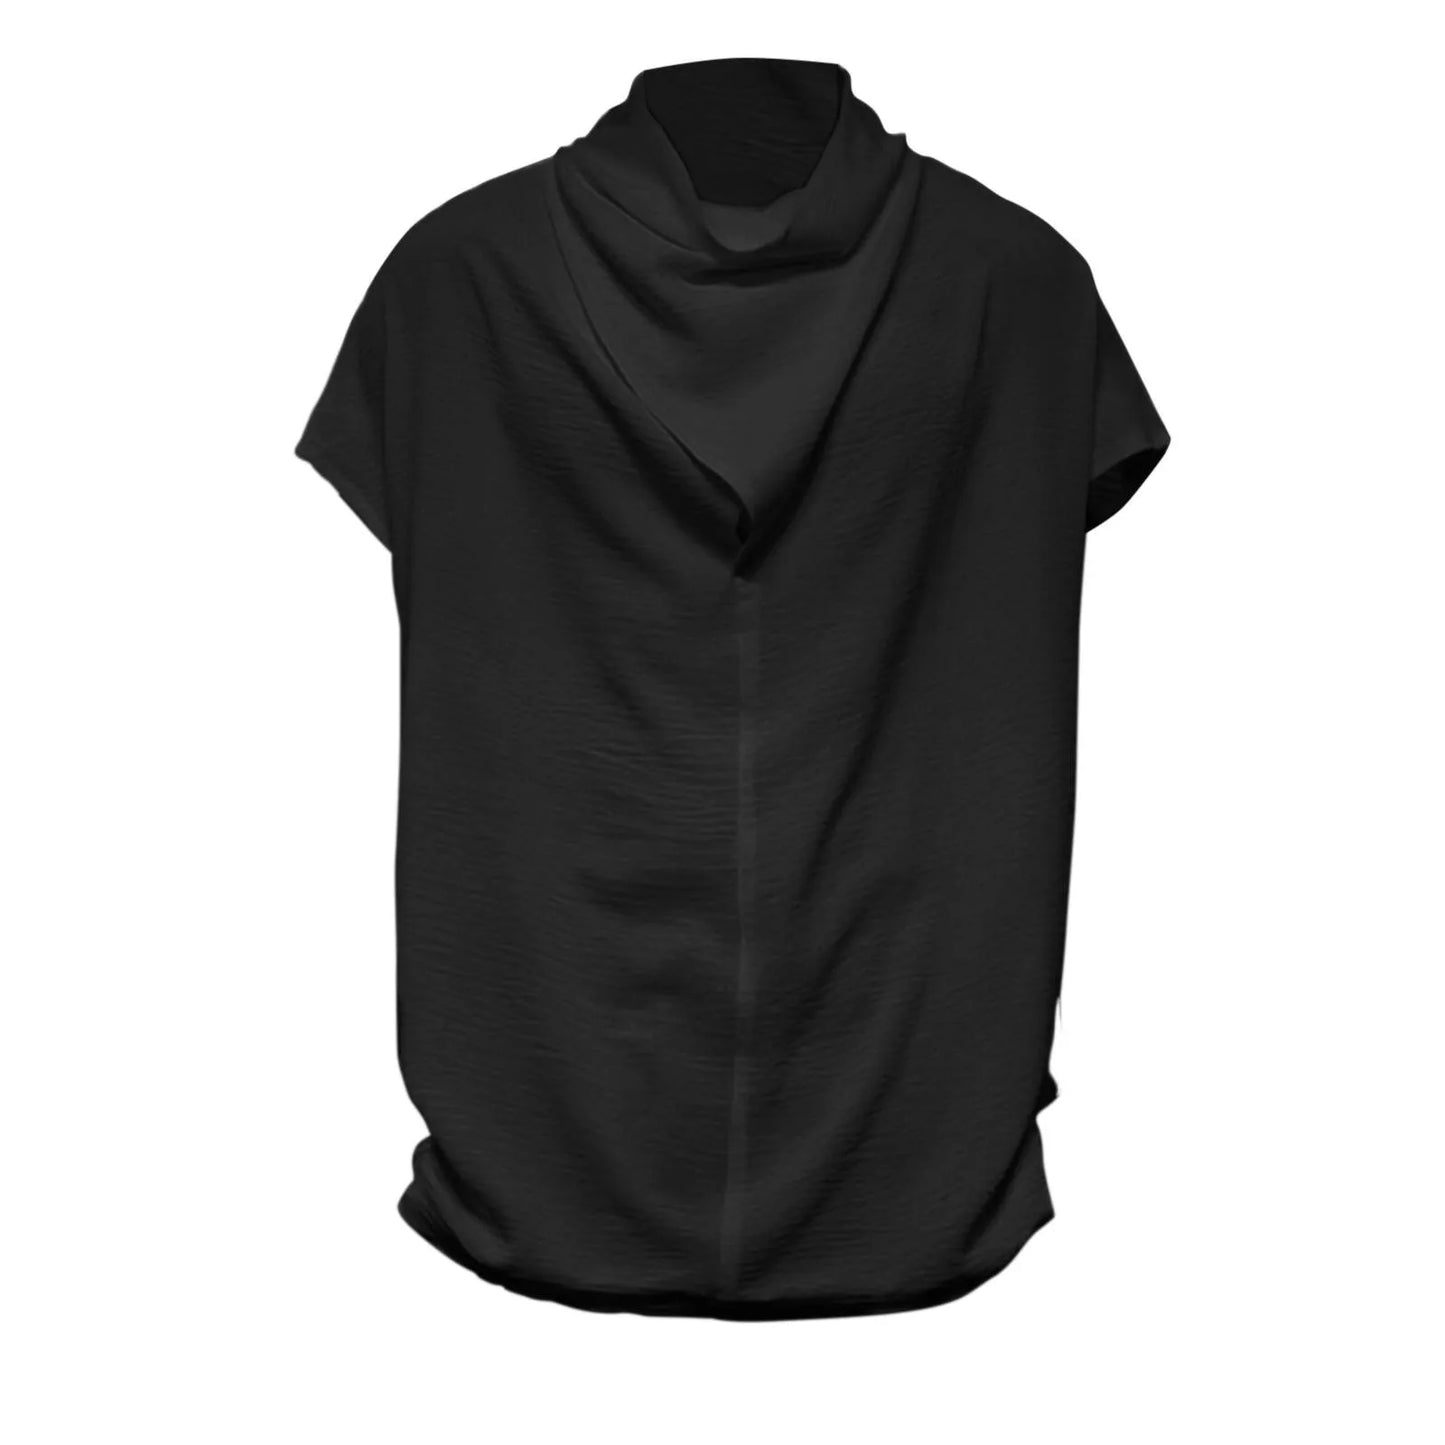 Men's  Silk Stacked Collar Sleeveless Undershirt Men's Sleeveless T Shirt/Men's Loose 3xlt Shirts for Men Big And Tall